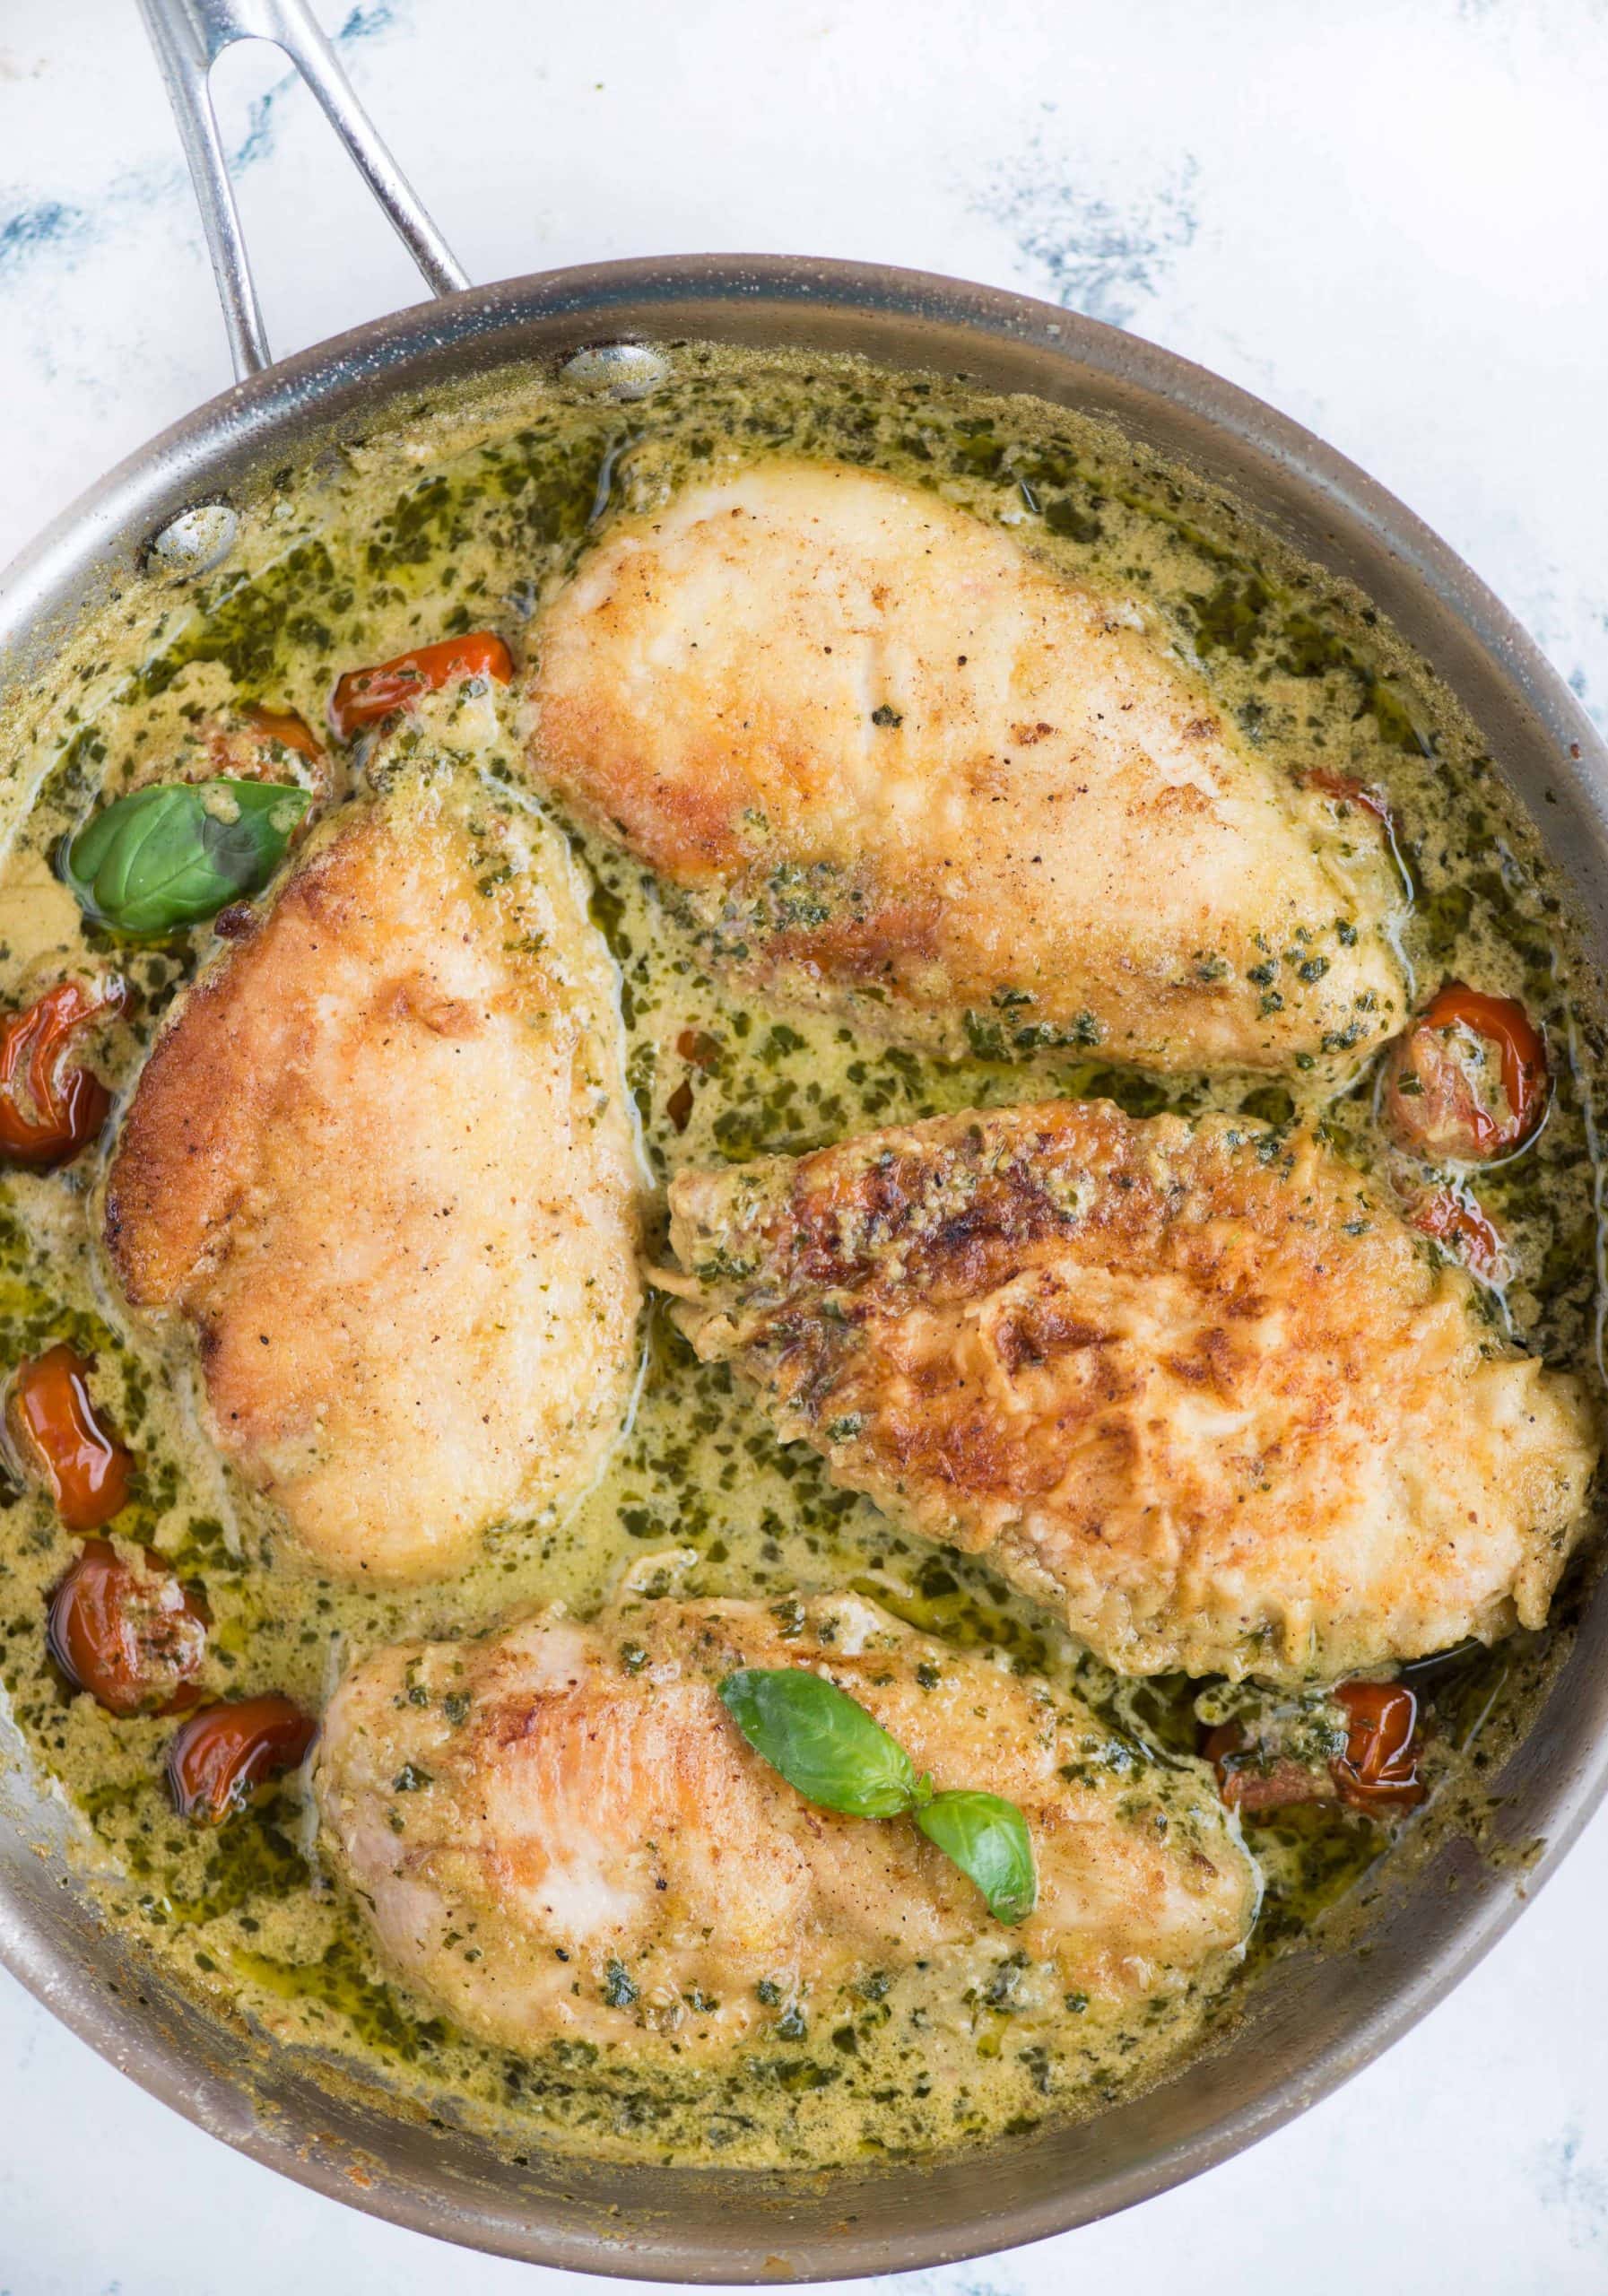 Pesto Chicken in a light and creamy sauce is packed with flavor that takes less than 30 minutes to make. Toss some pasta in the sauce and a delicious dinner is on the table in no time. 